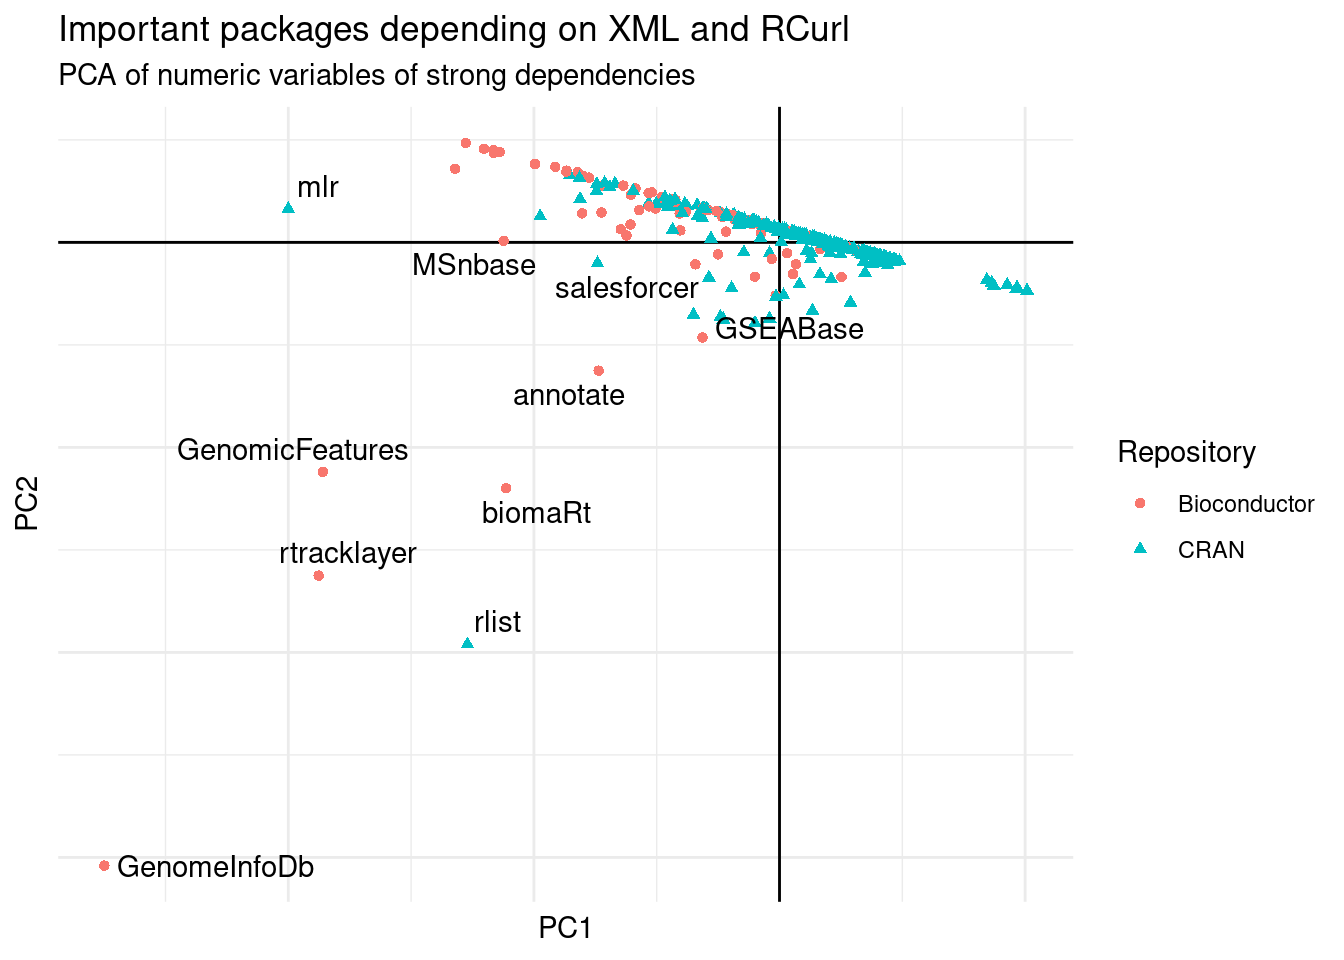 PCA of packages with strong dependency to XML or RCurl.